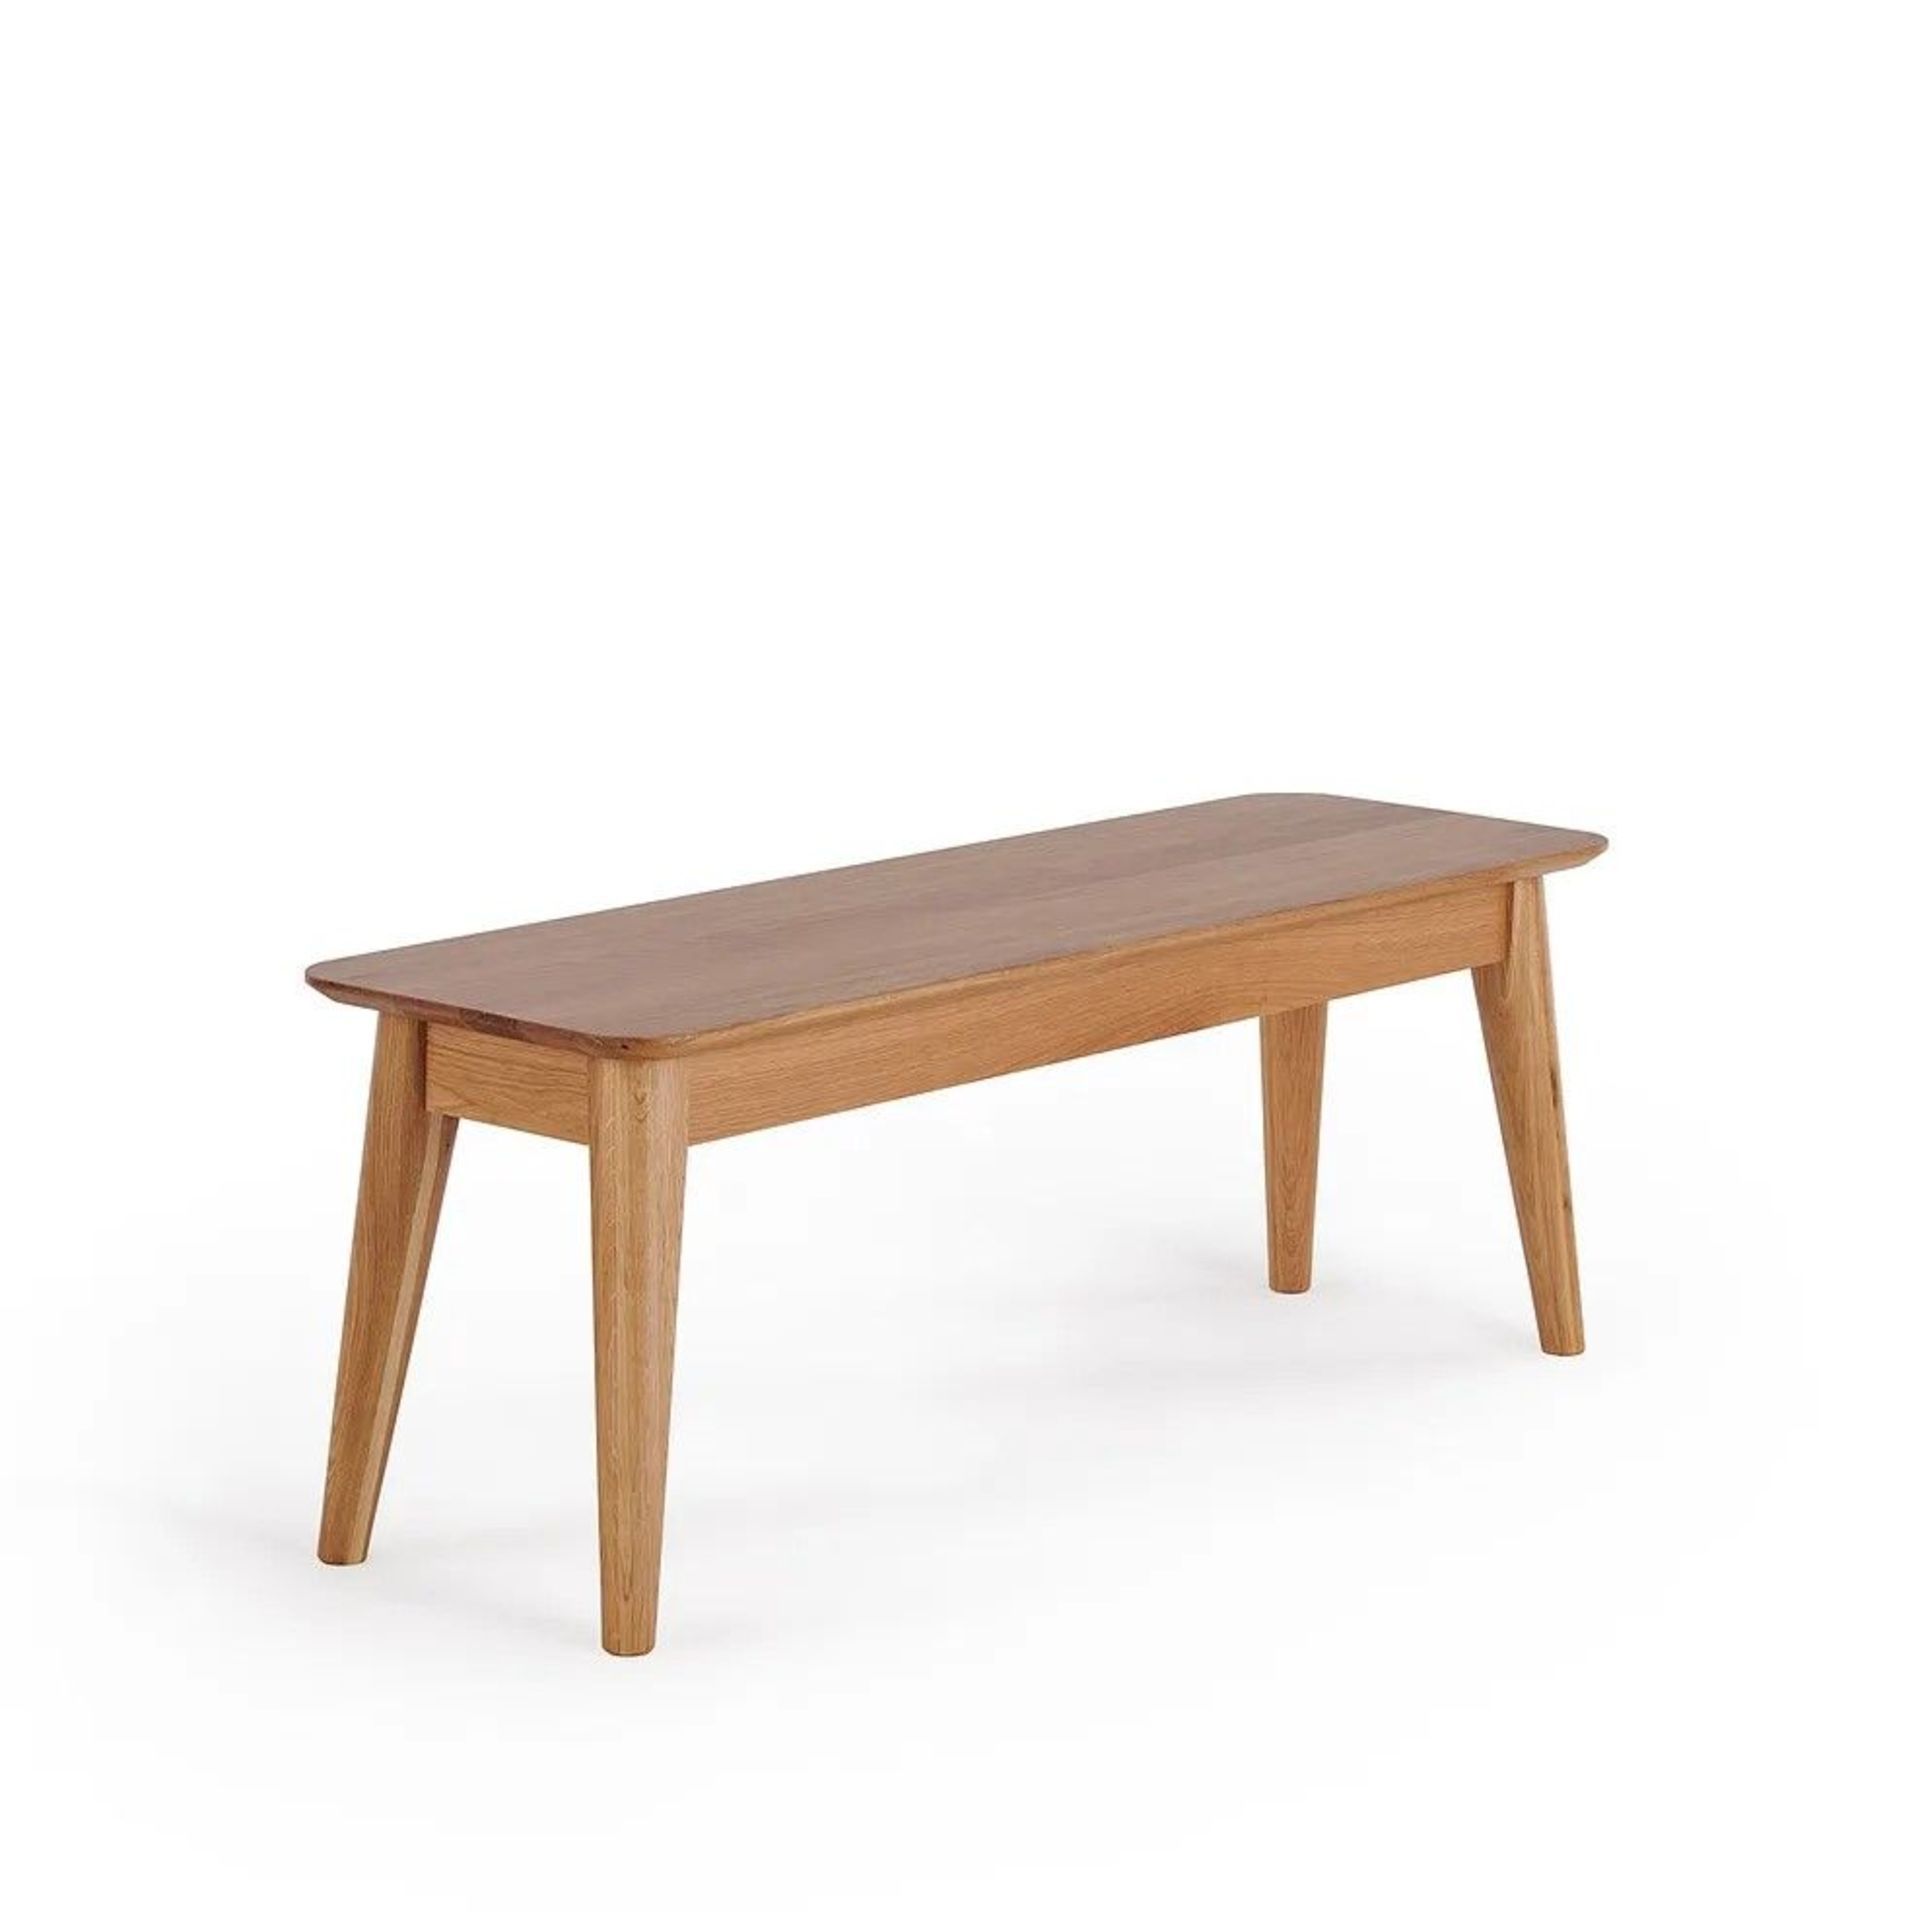 New Boxed - Oscar Natural Solid Oak Bench. 120cm Long. RRP £290. For a more open seating